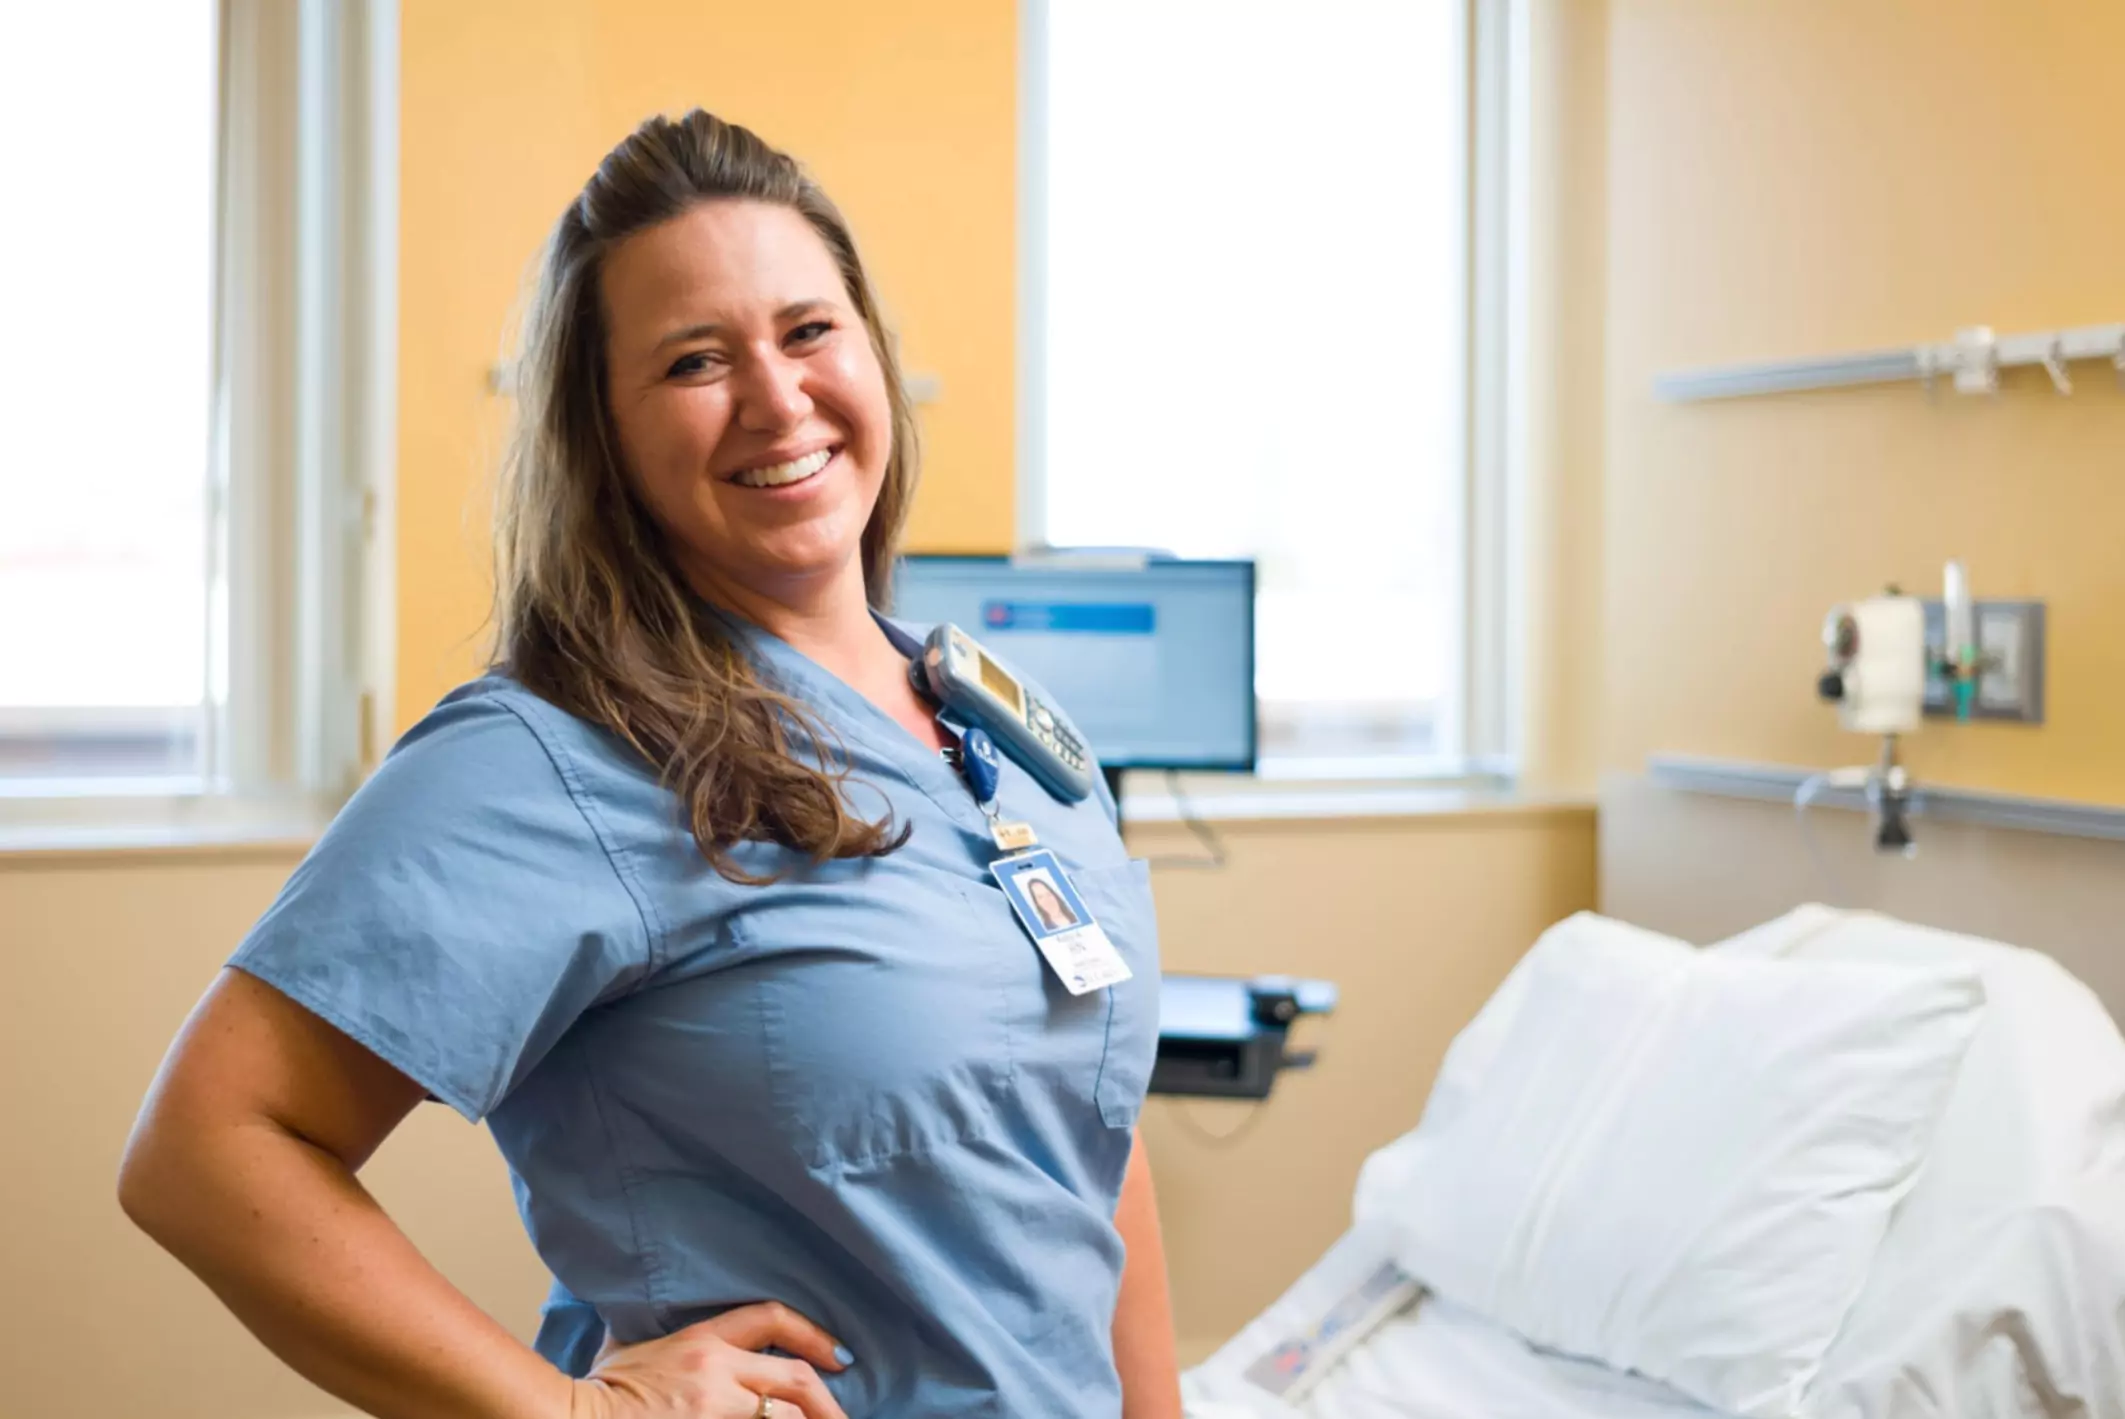 Kelly, RN smiles in St. Luke's Surgical & Procedural Care.